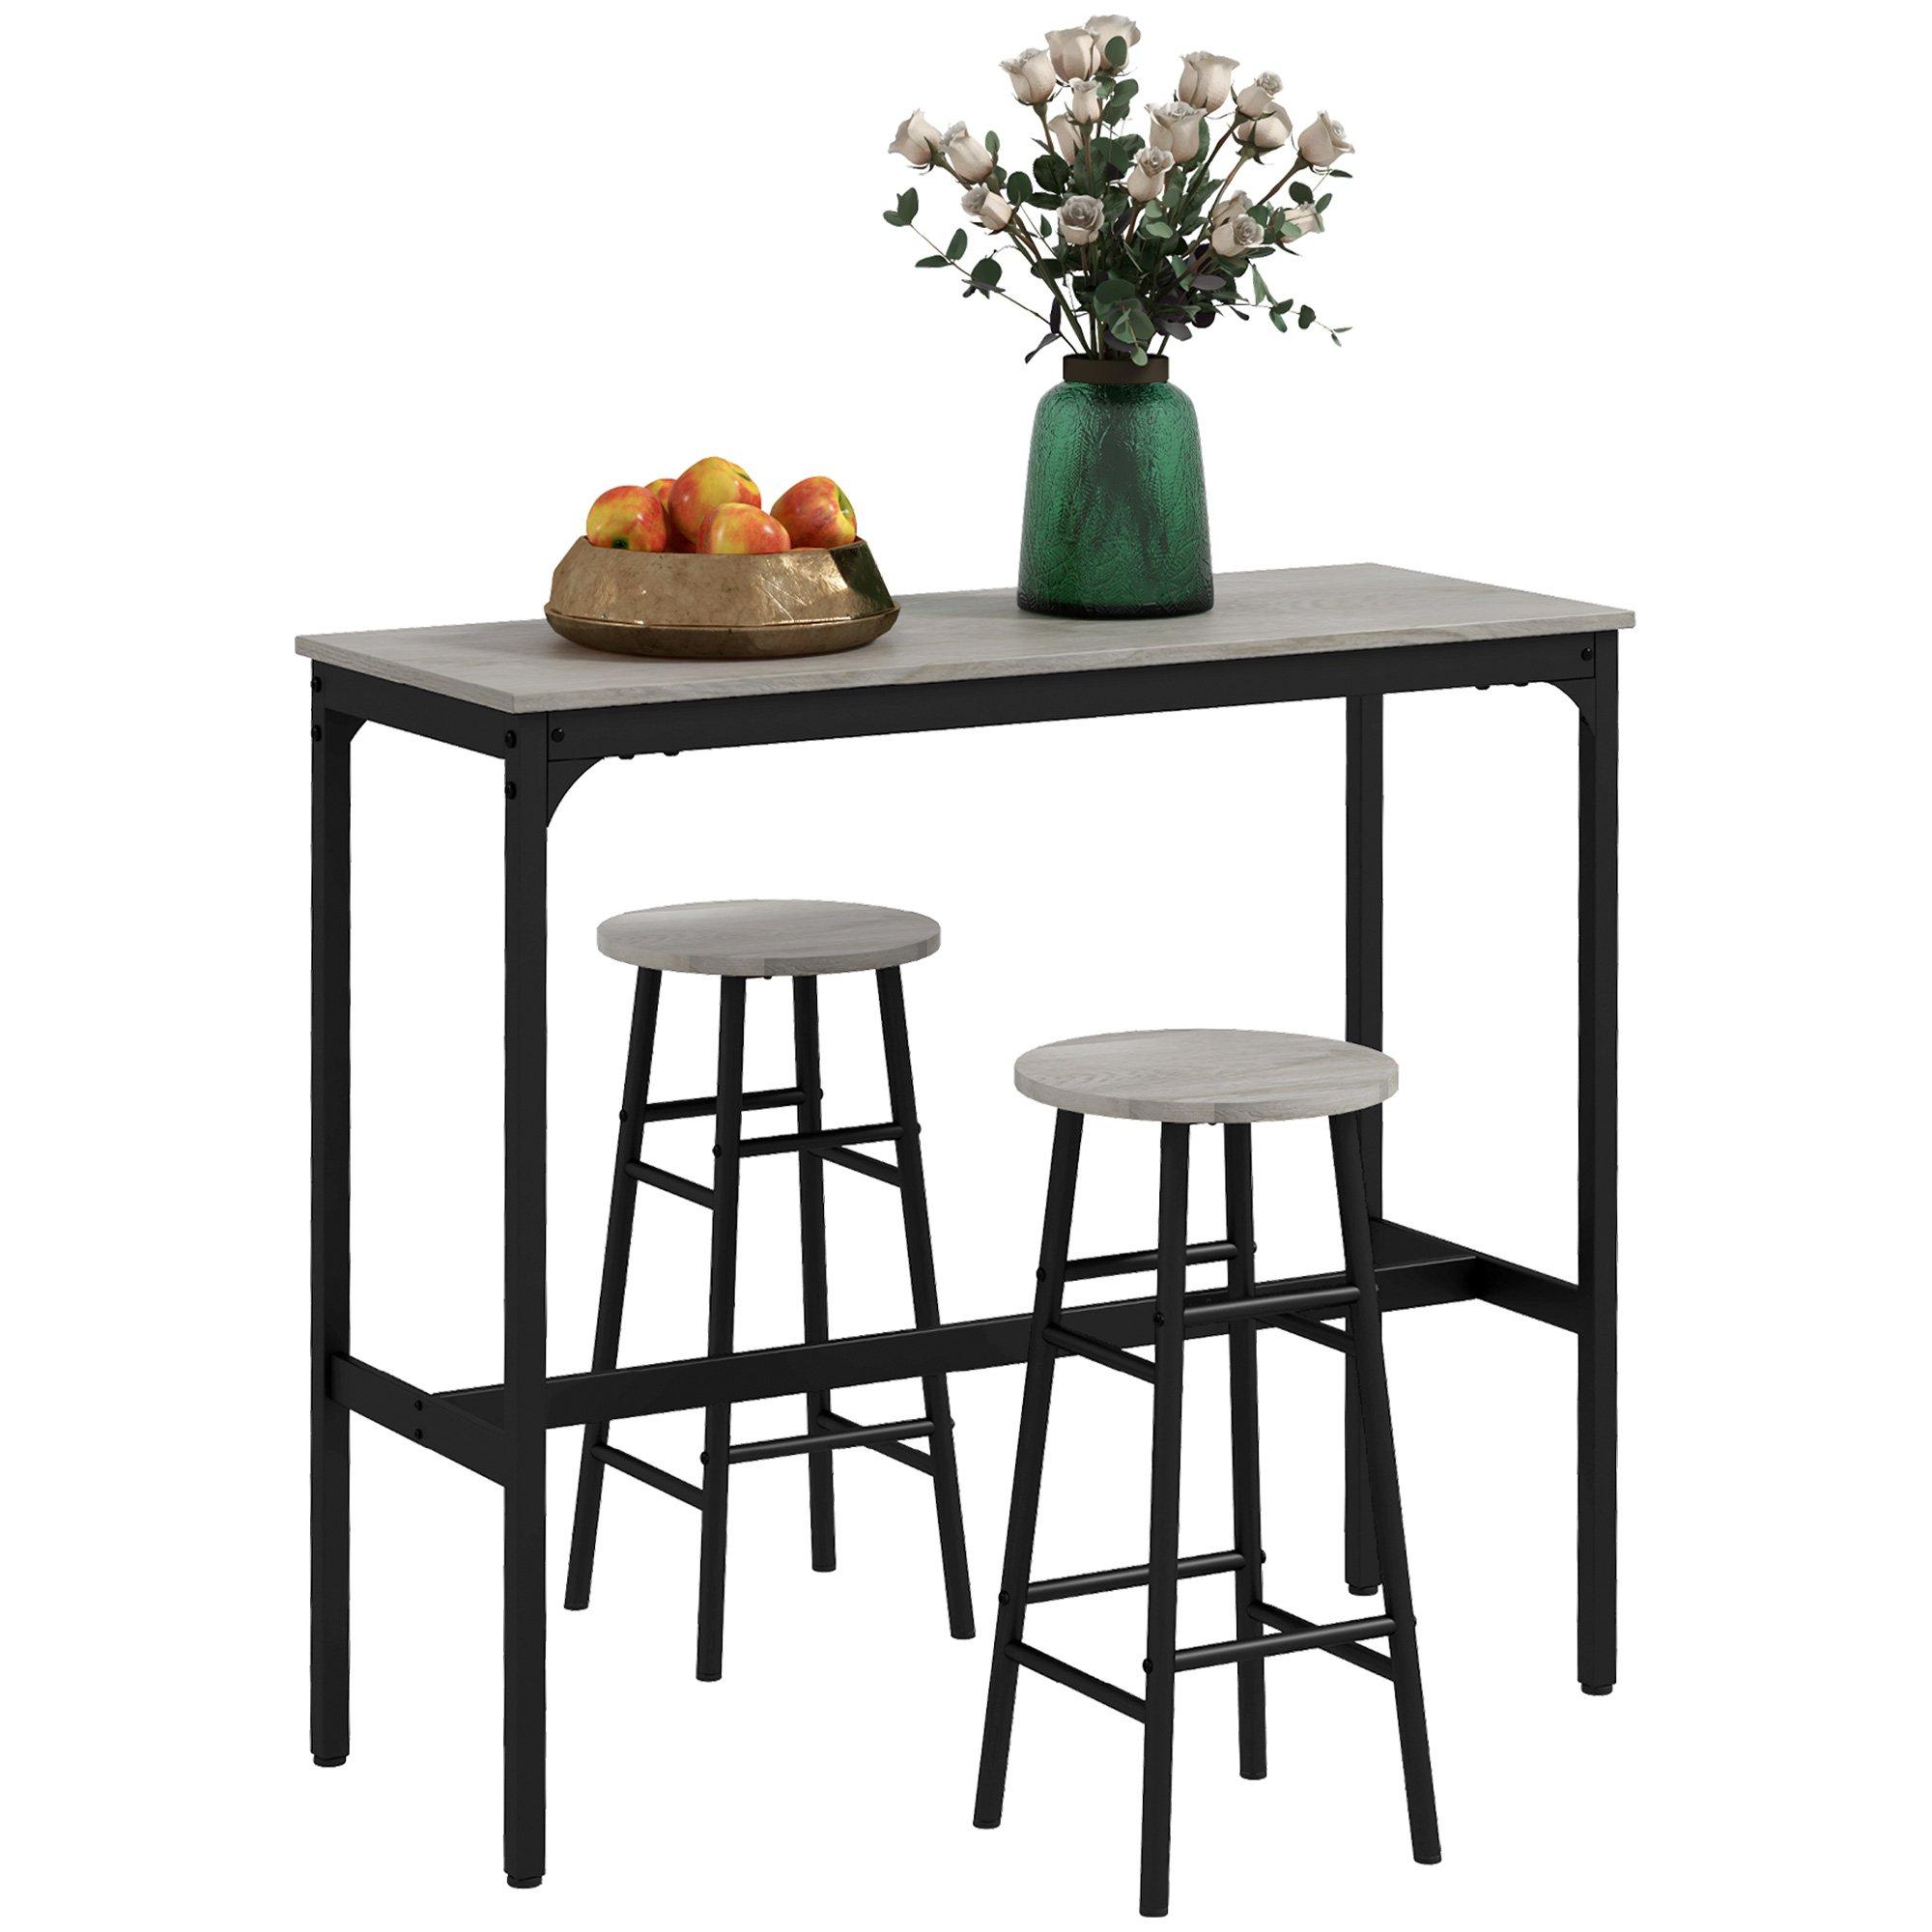 3 Piece Bar Table and Stool Set Kitchen Table with 2 Stools